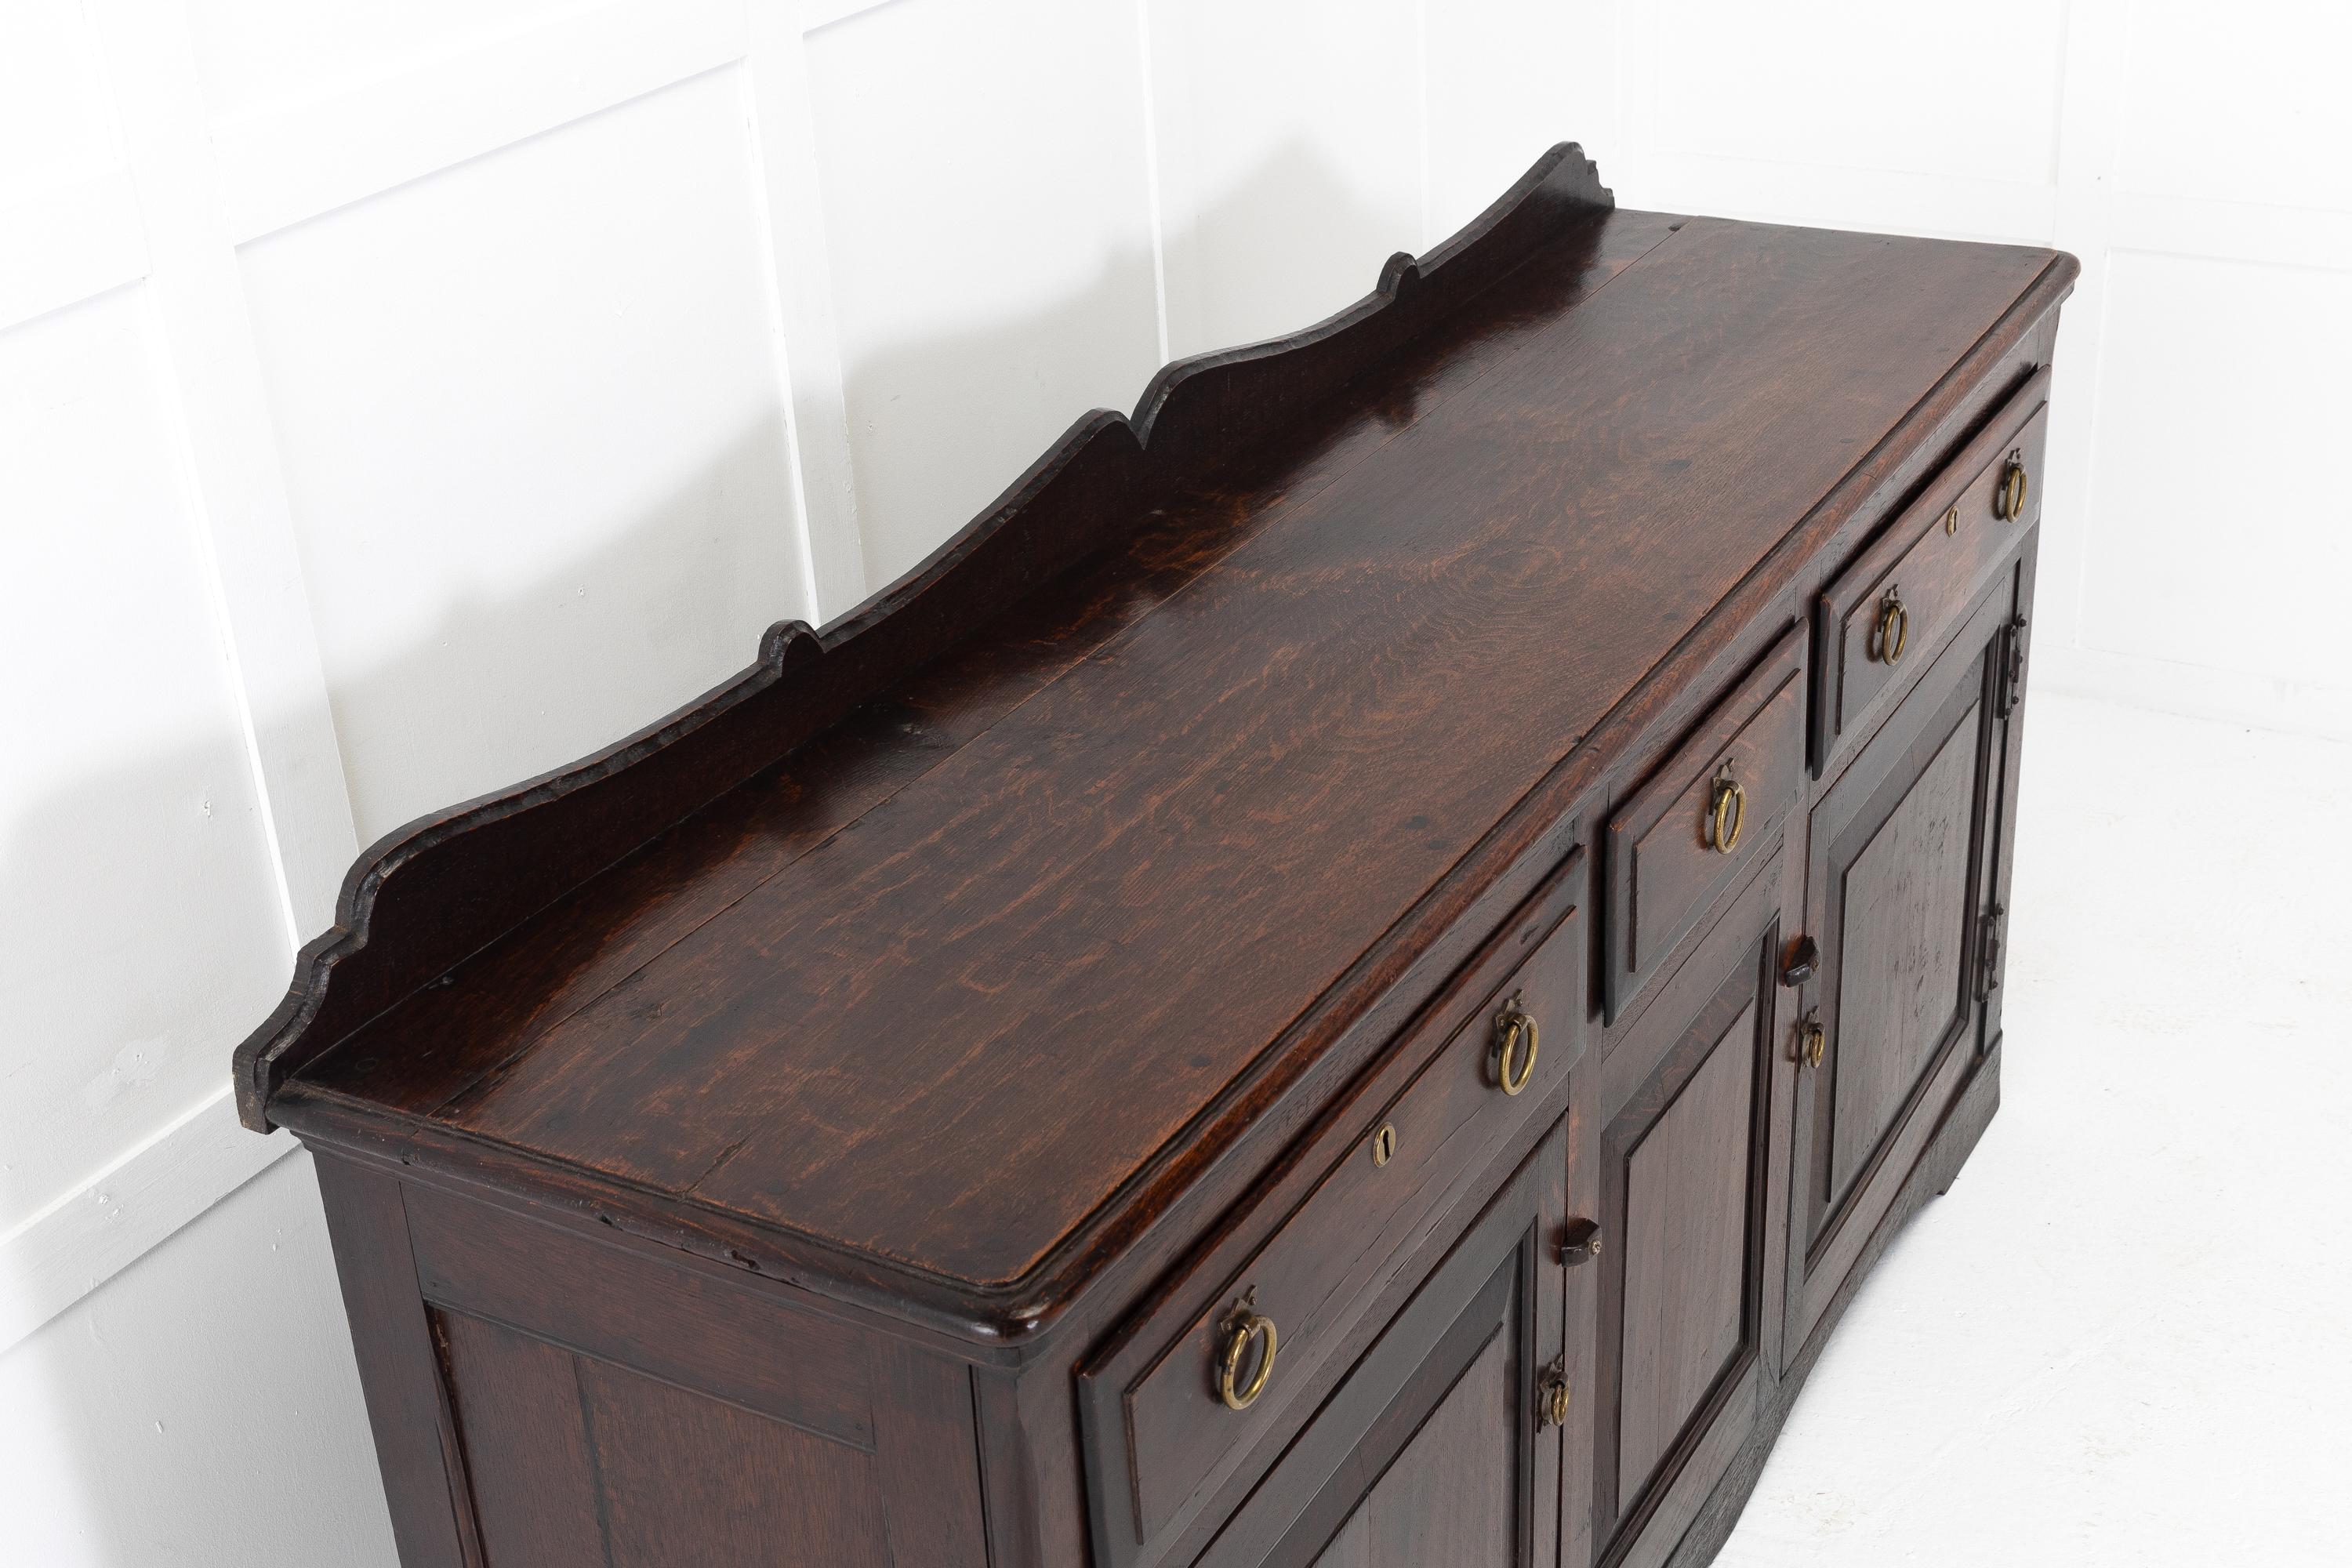 18th Century English George III oak dresser base with shaped gallery back. Having three drawers across the top with brass ring pull handles and escutcheons. The full cupboard below the drawers has panelled cupboard doors at each end to access the